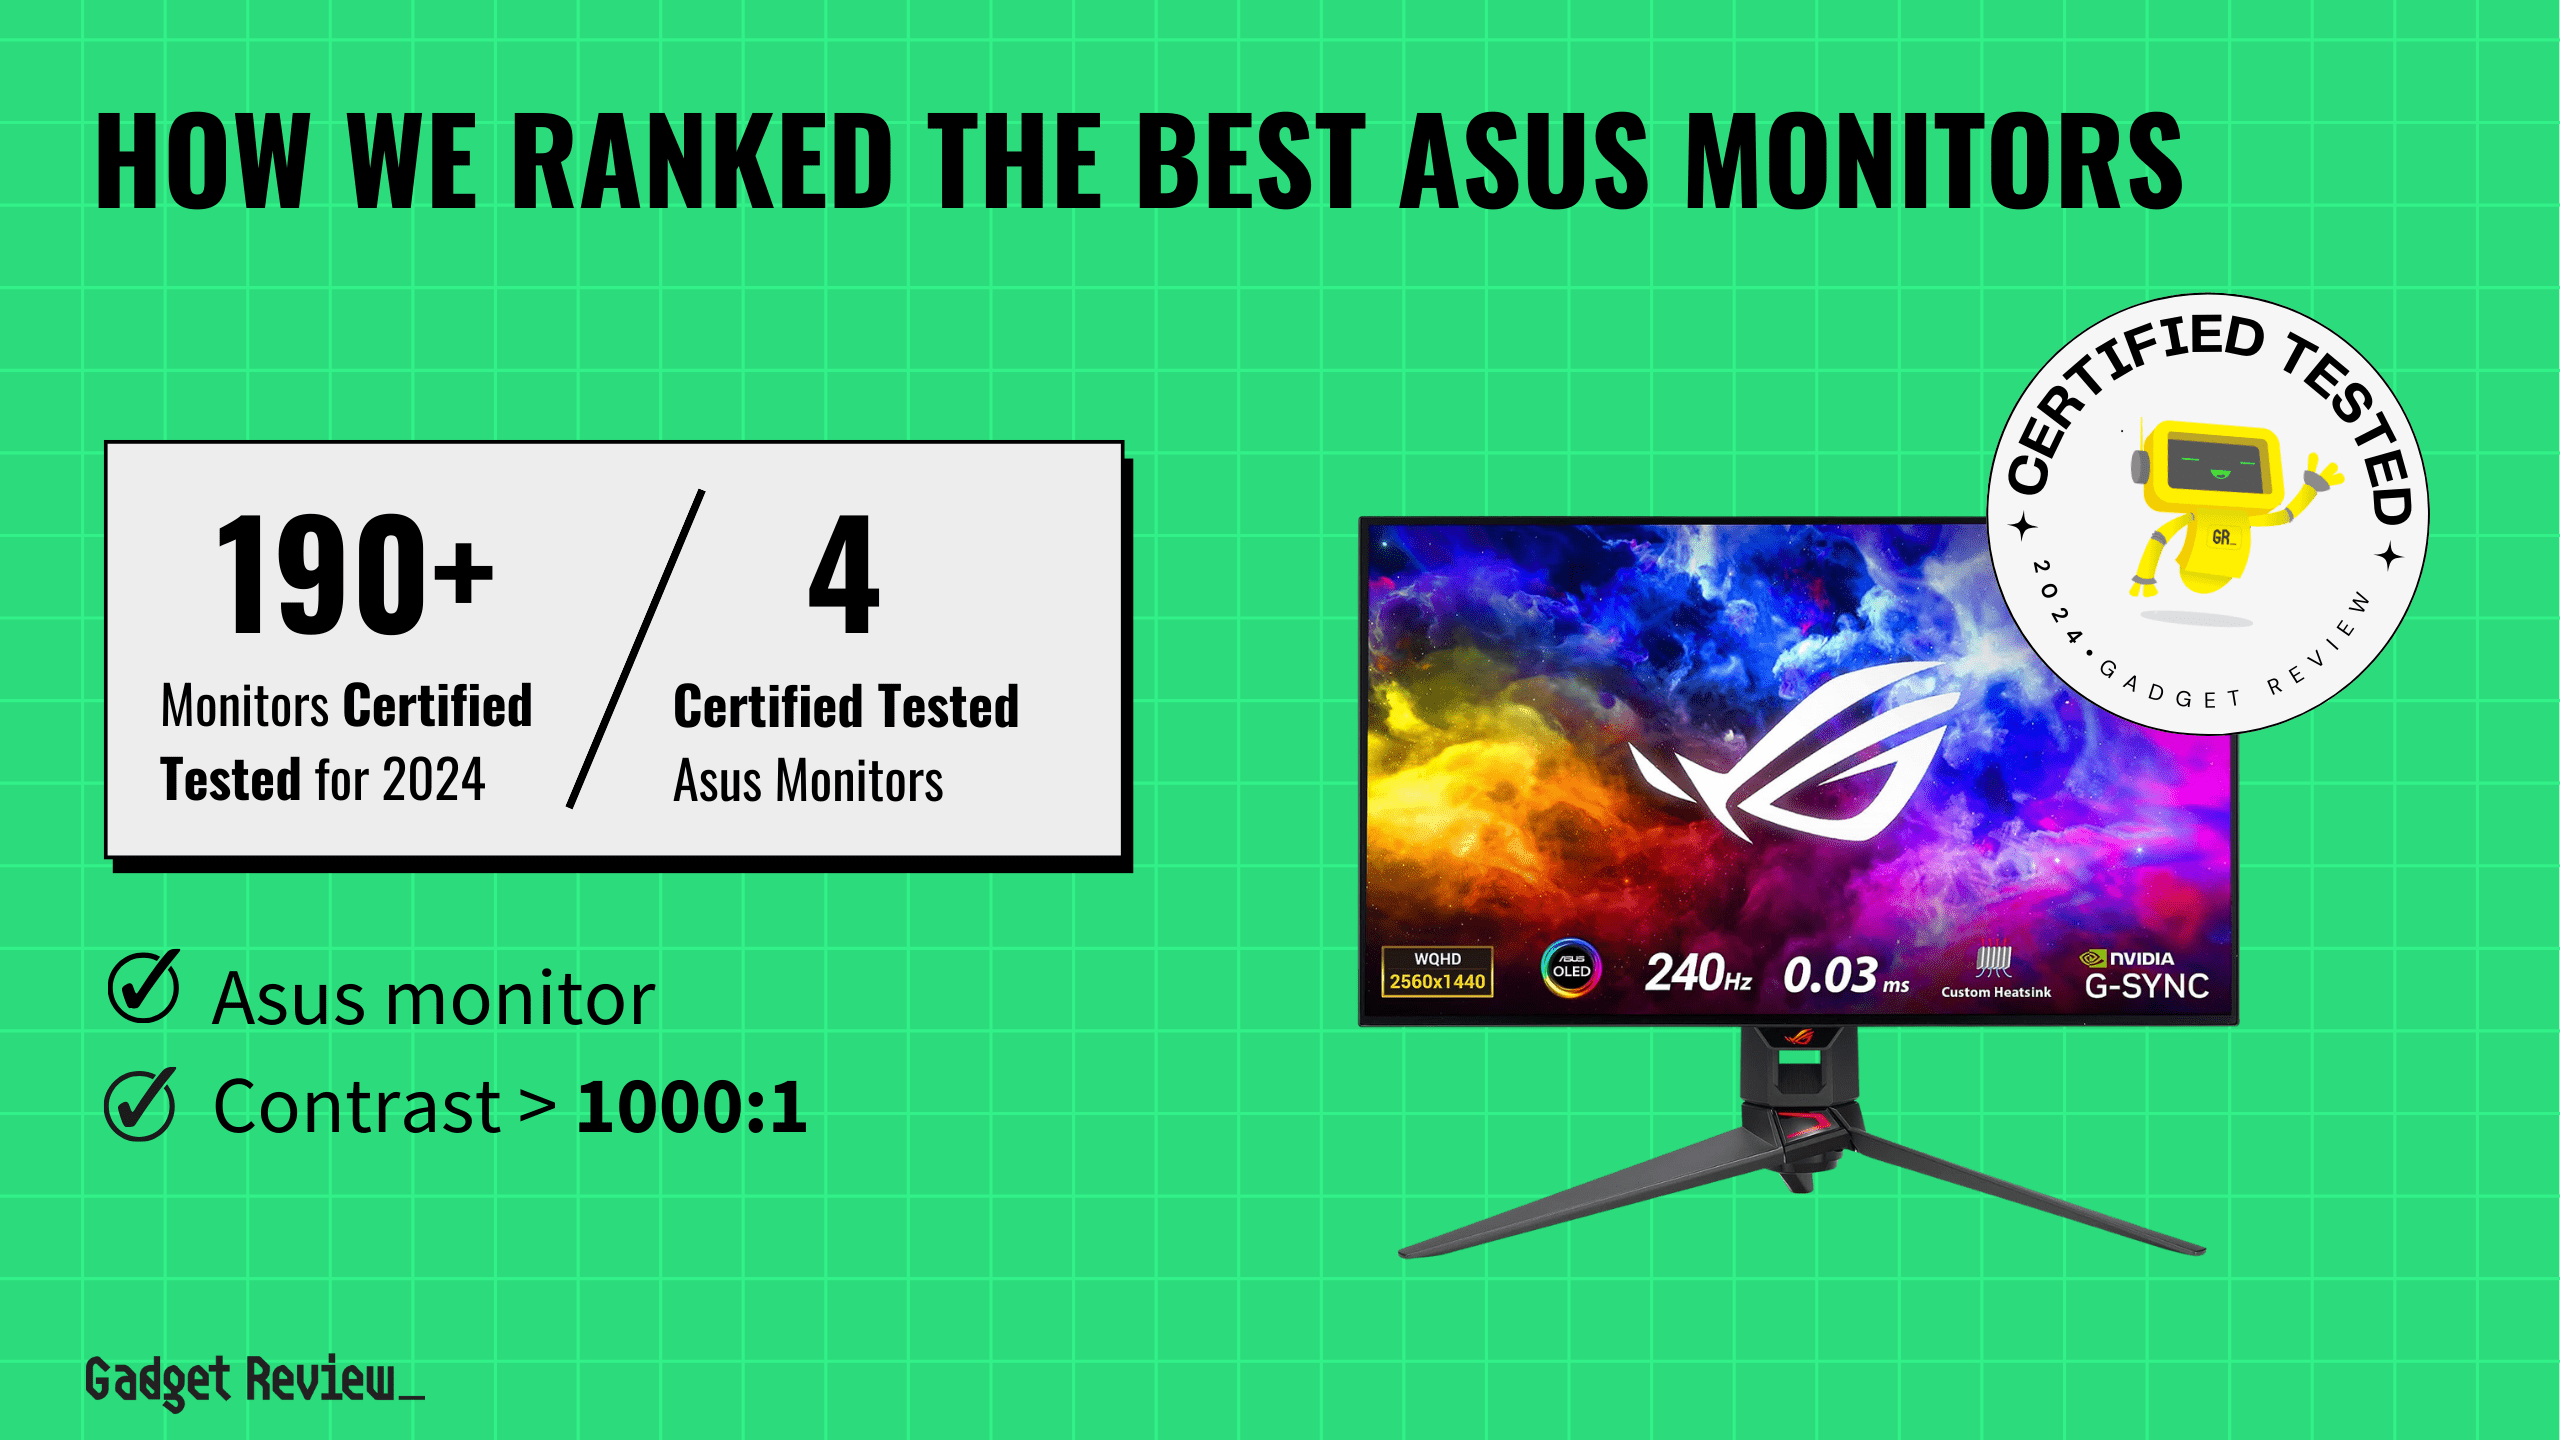 best asus monitor guide that shows the top best computer monitor model